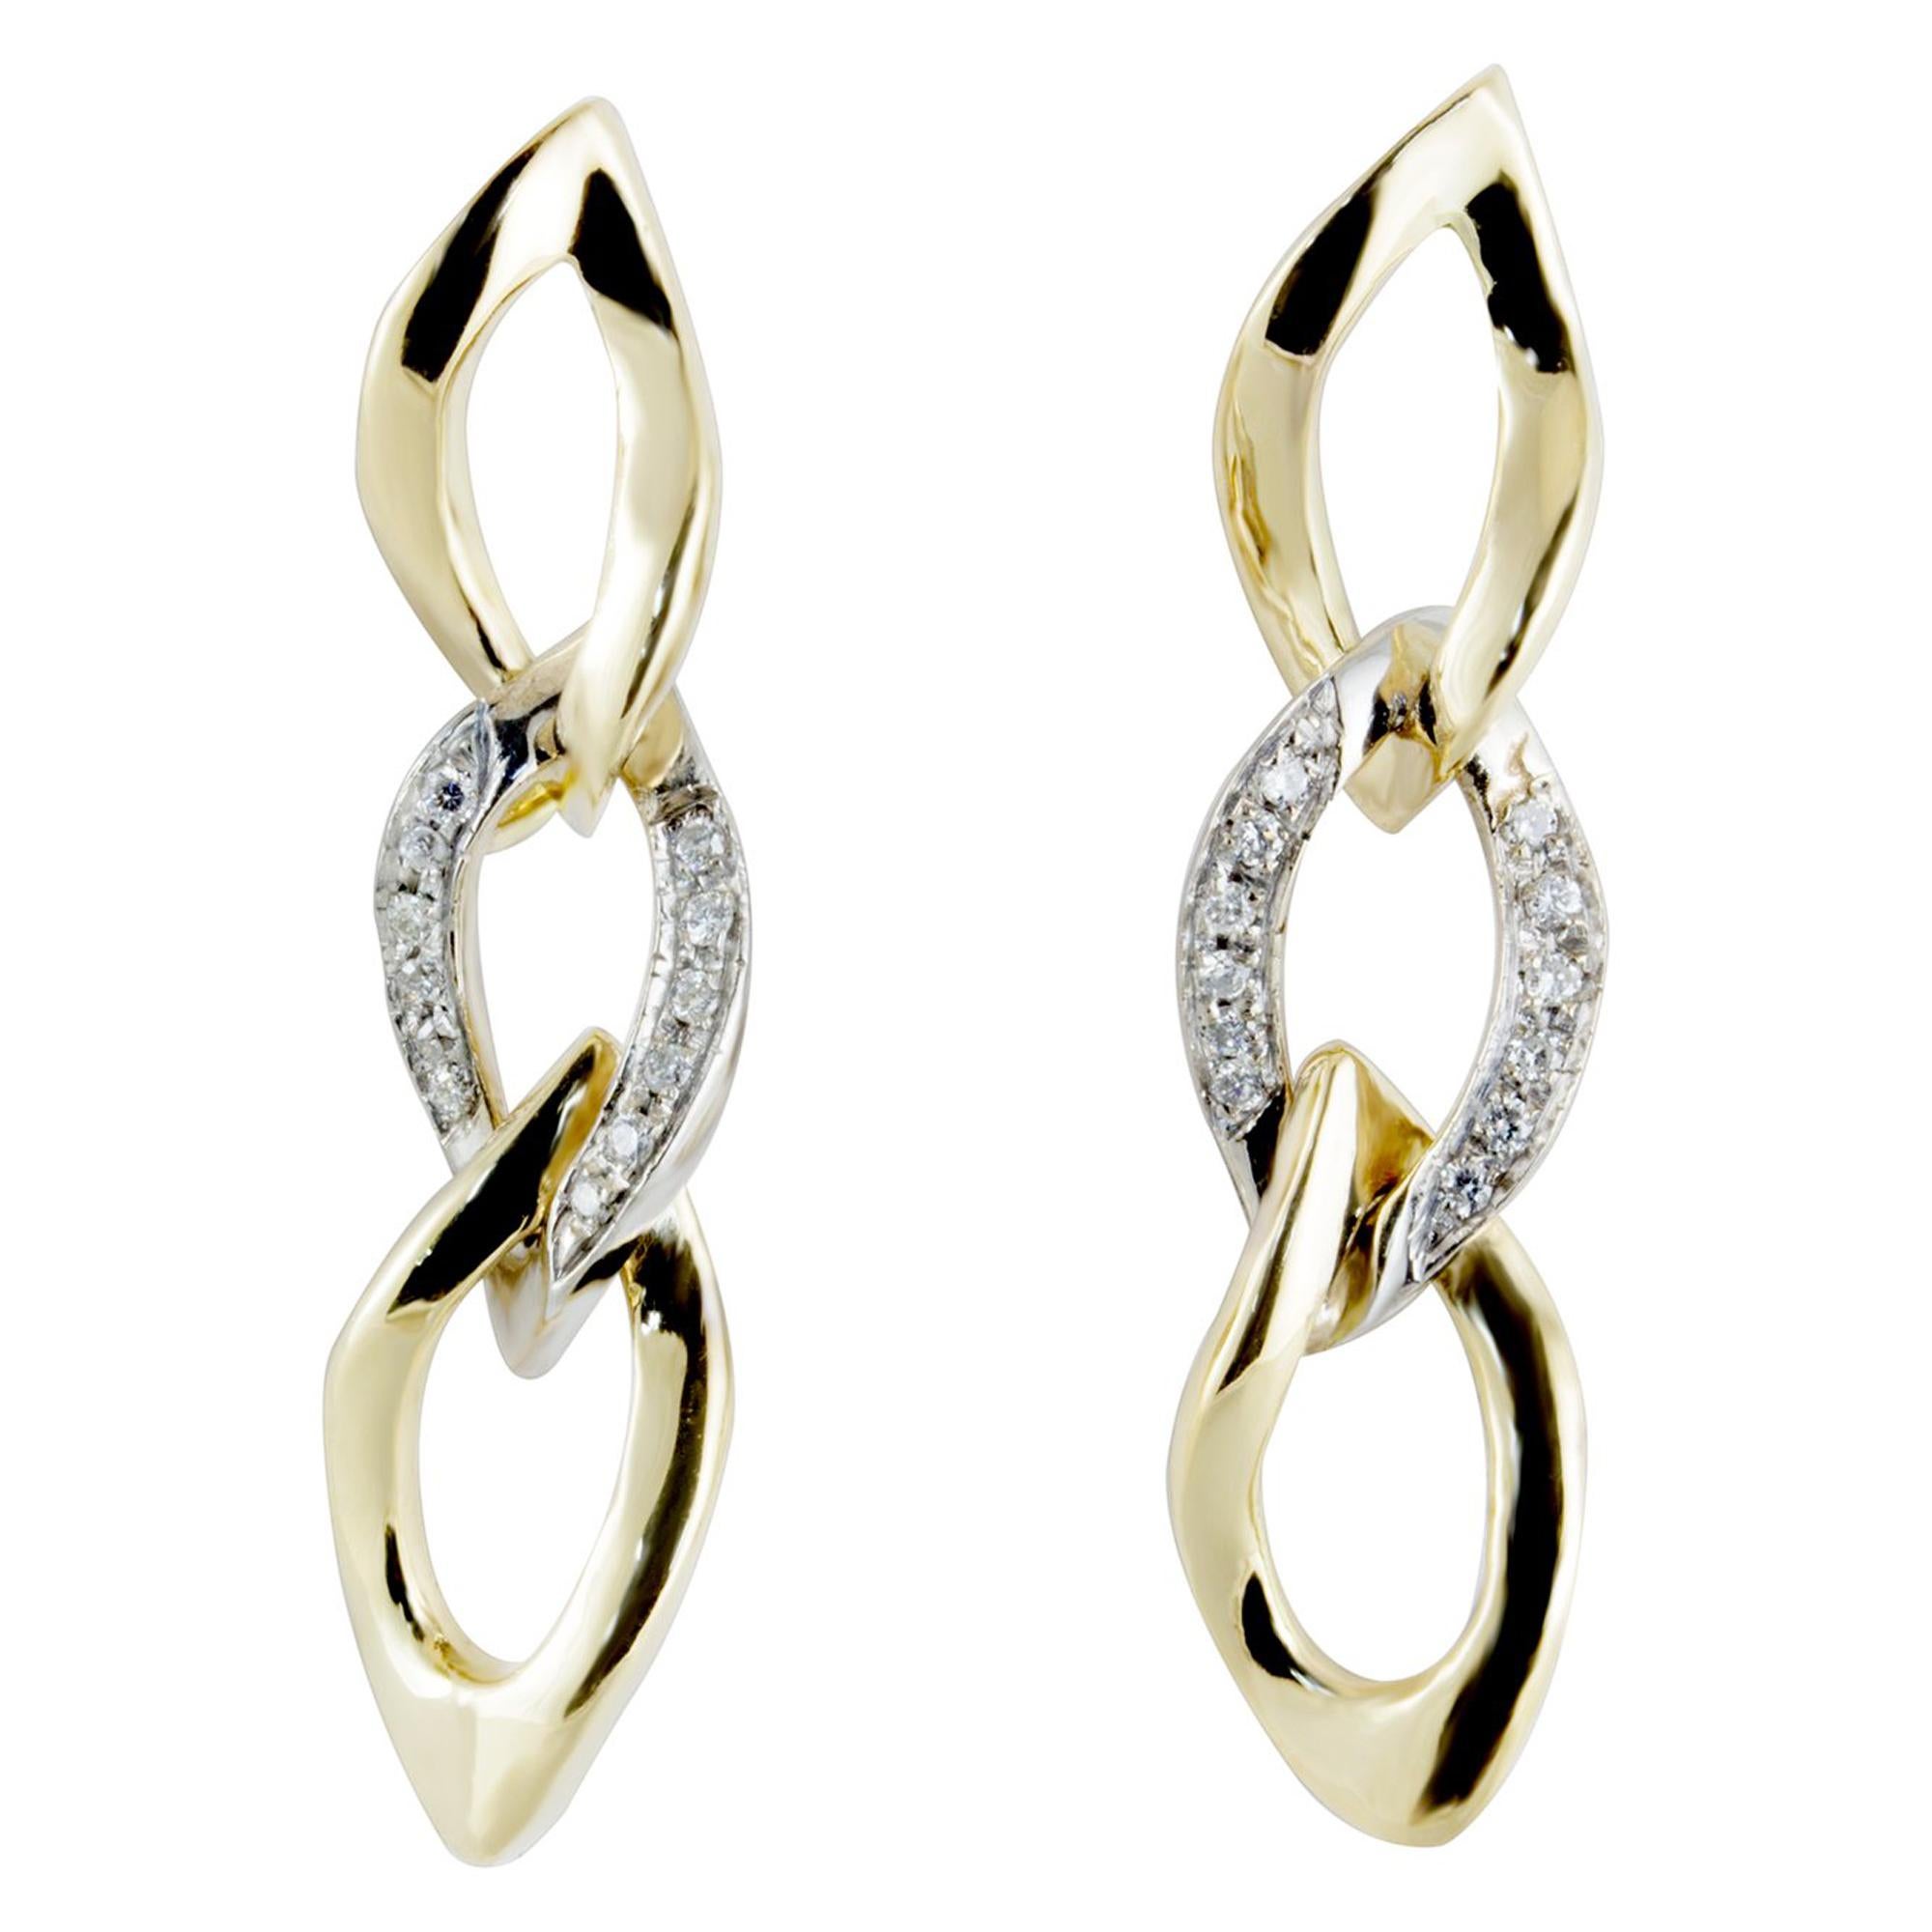 Contemporary Annellino Italian Fine Jewellery Chain Drop Yellow Gold and Diamond Earrings For Sale